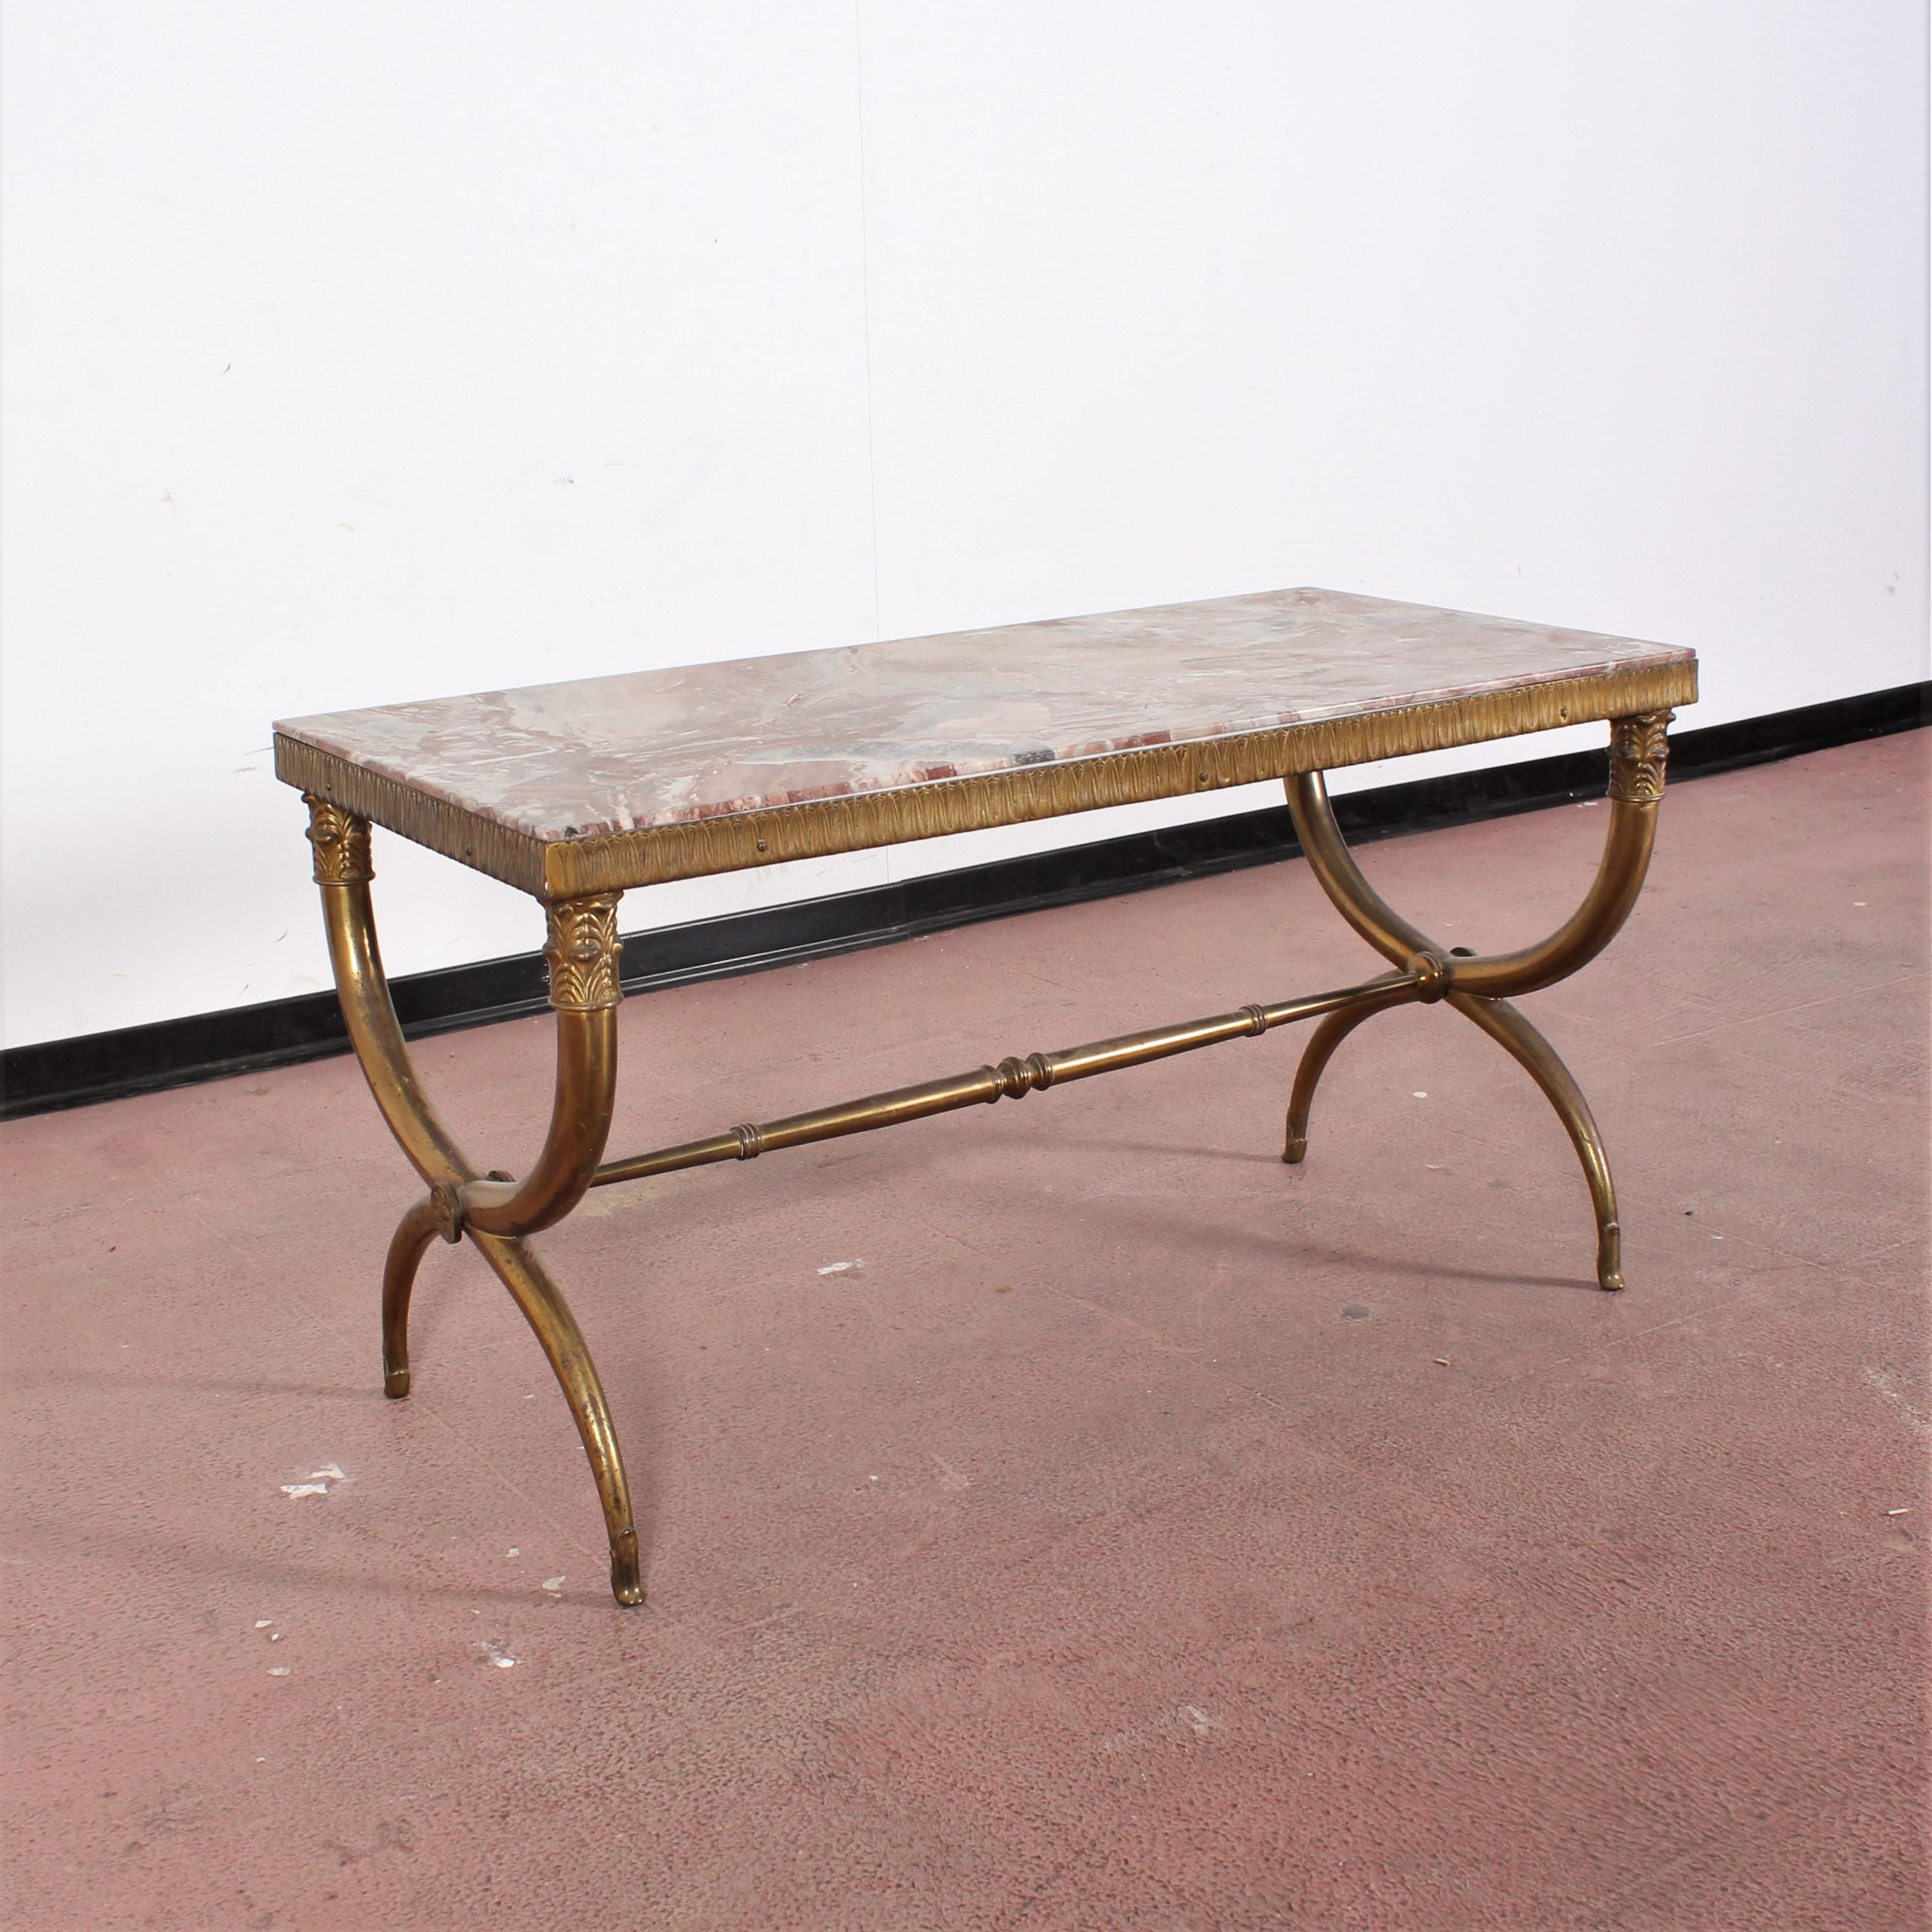 Elegant coffee table made of curved solid brass with colored marble top. Attributed to Paolo Buffa, Italian production of the 1950s.
Wear consistent with age and use.